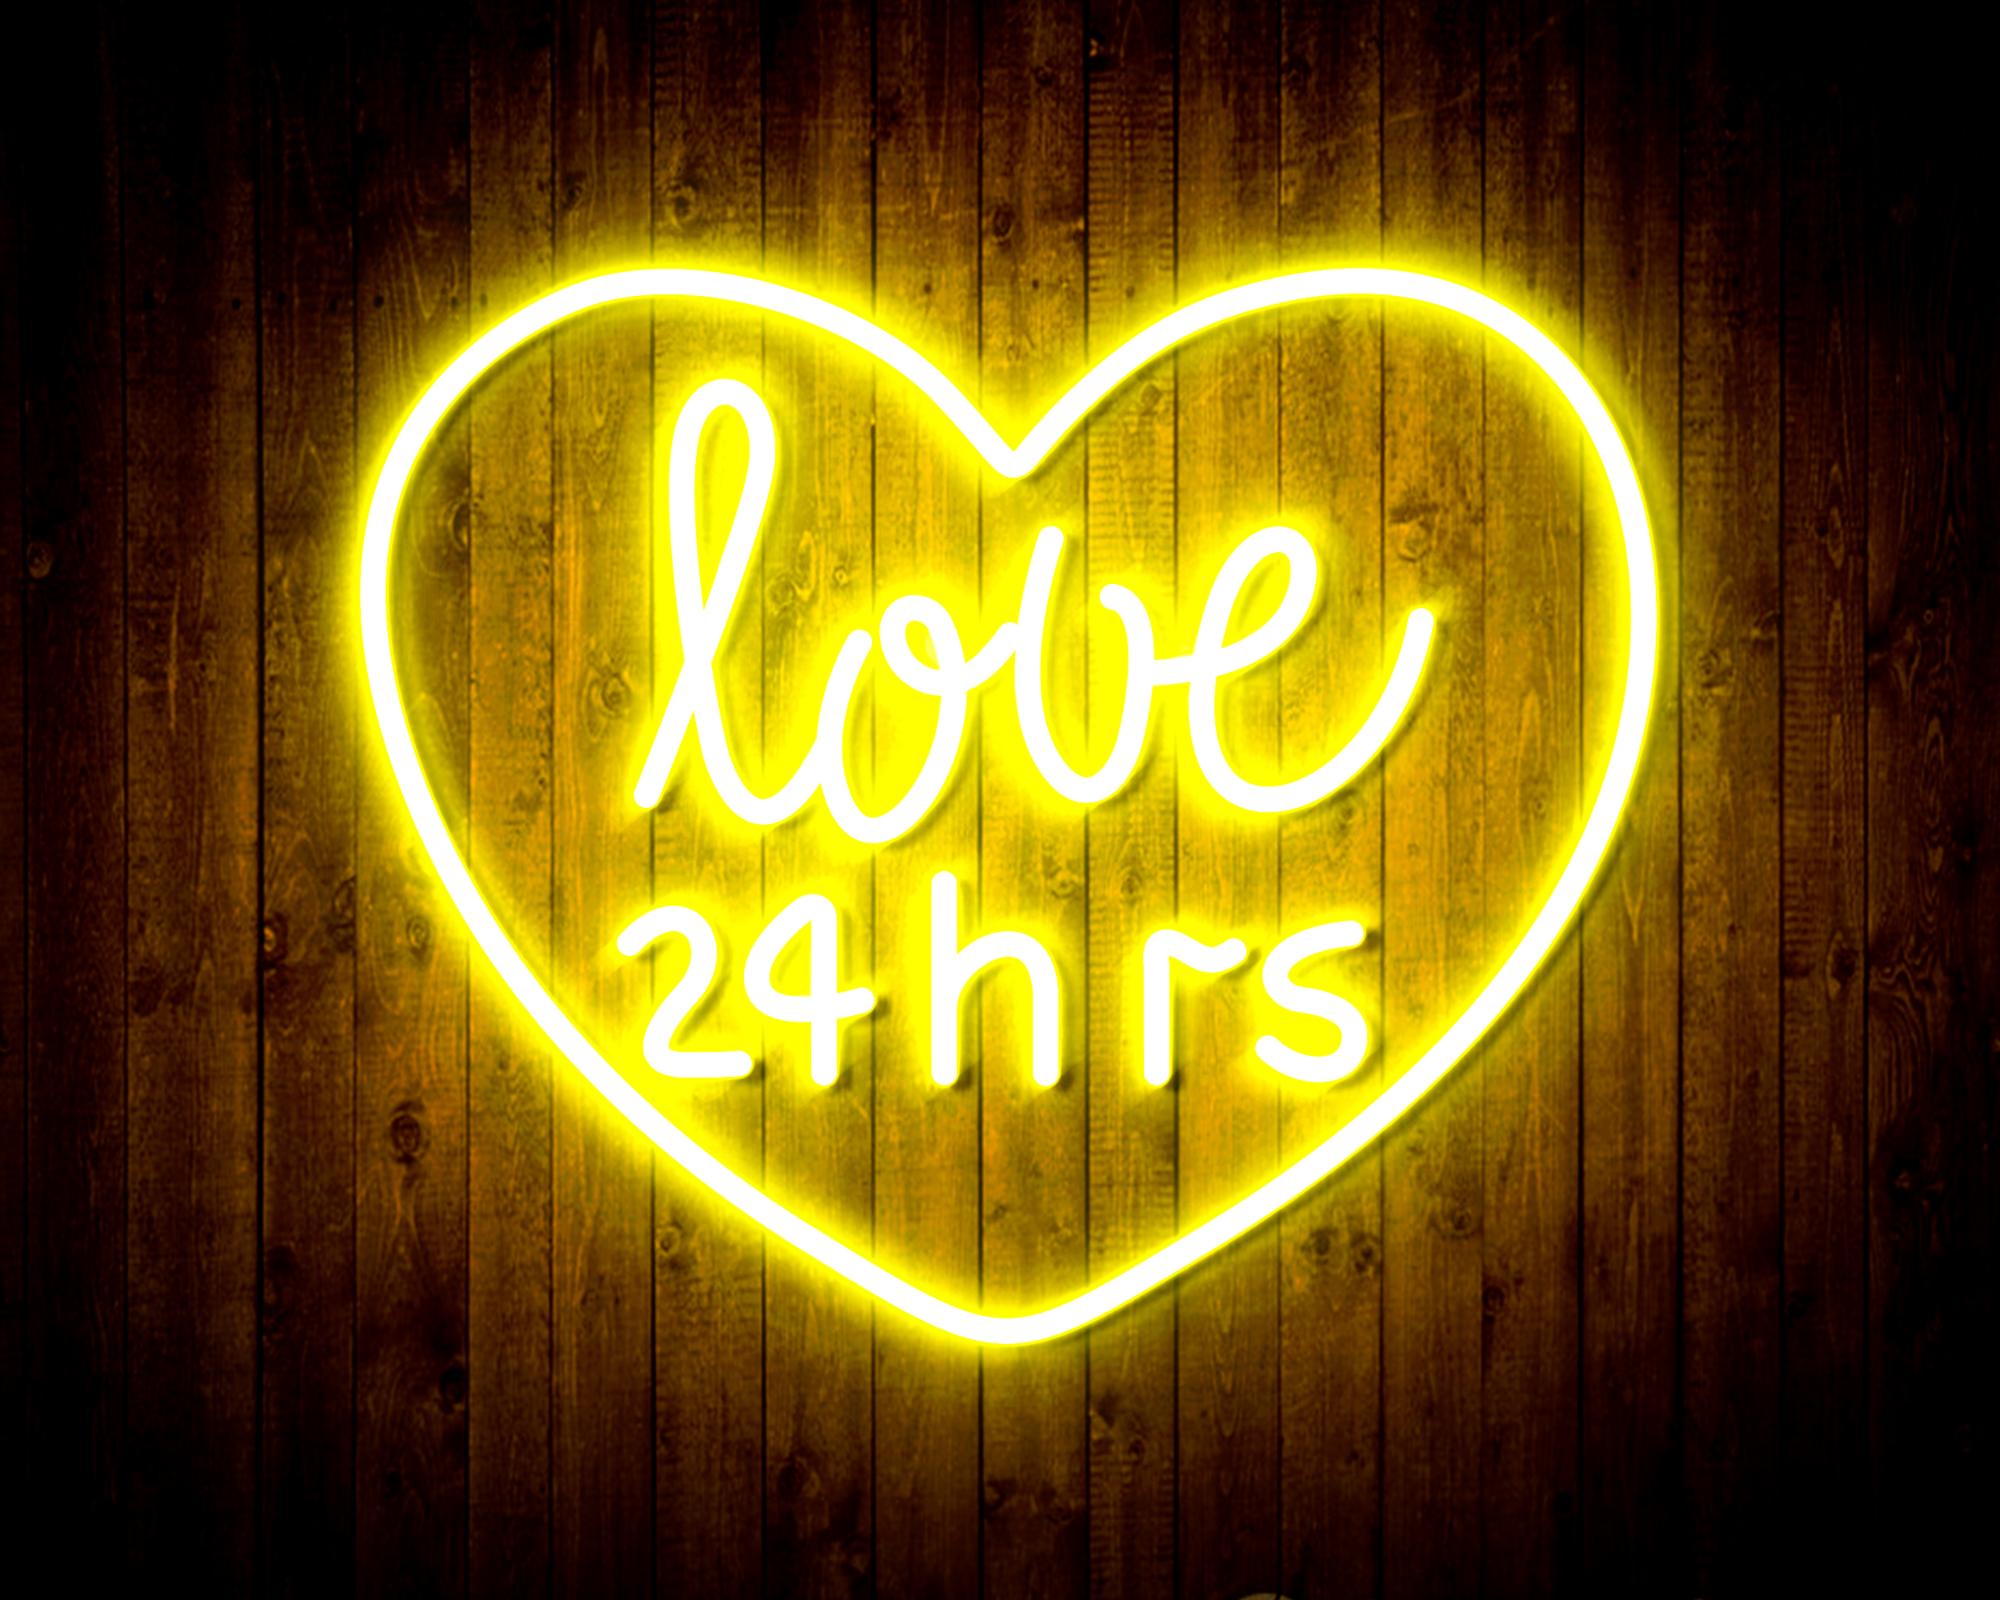 Love 24 Hours LED Neon Sign Wall Light